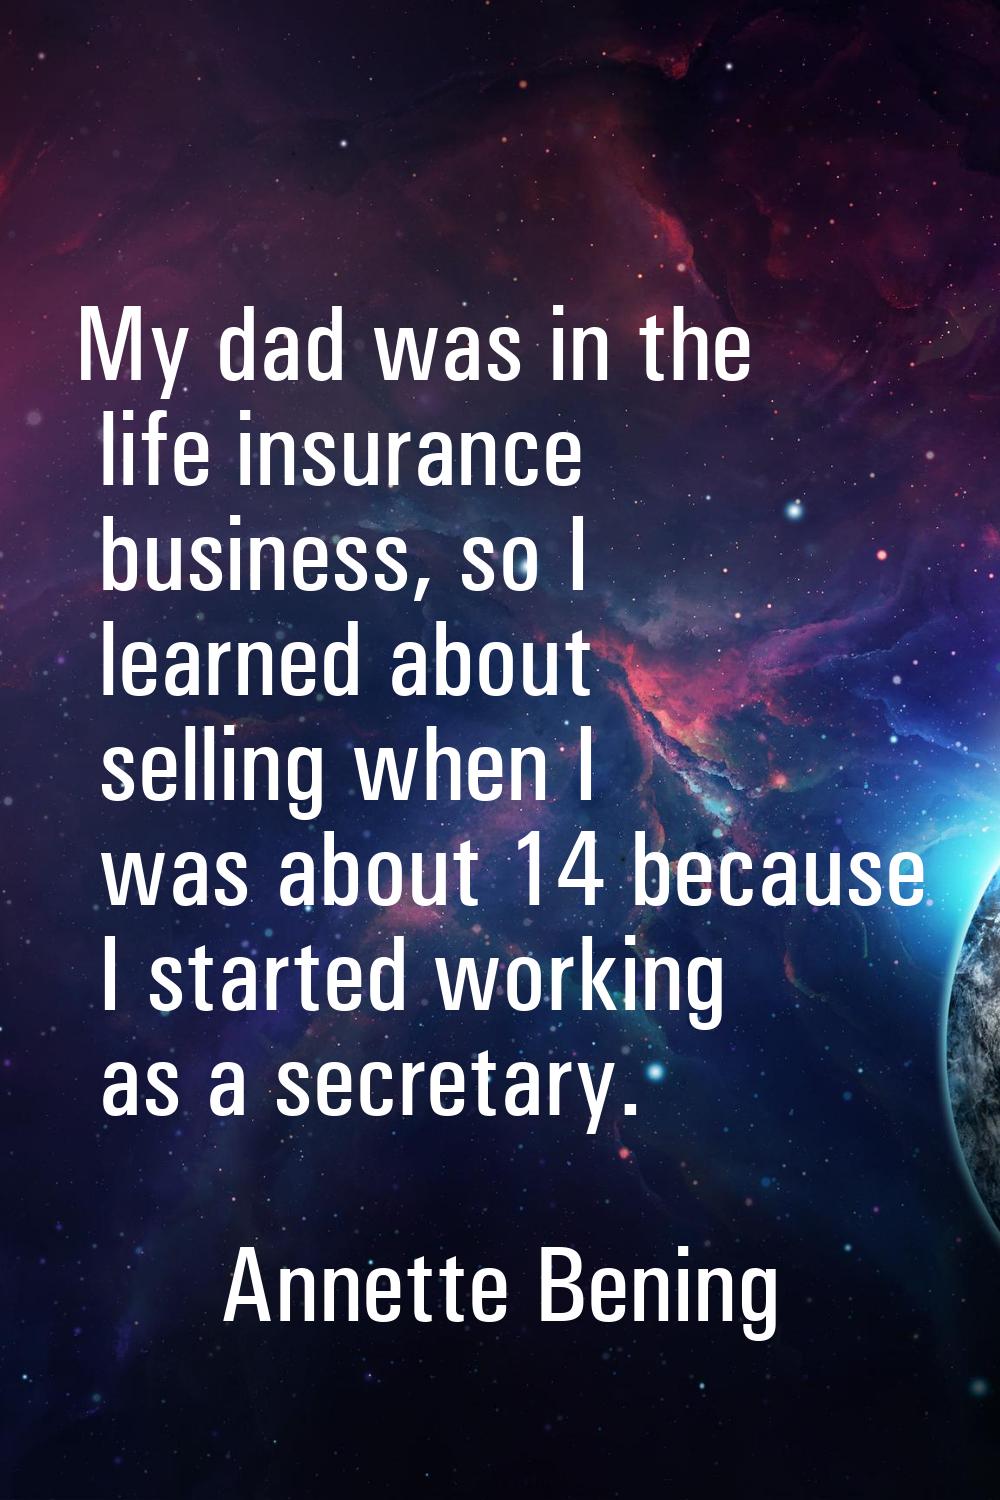 My dad was in the life insurance business, so I learned about selling when I was about 14 because I